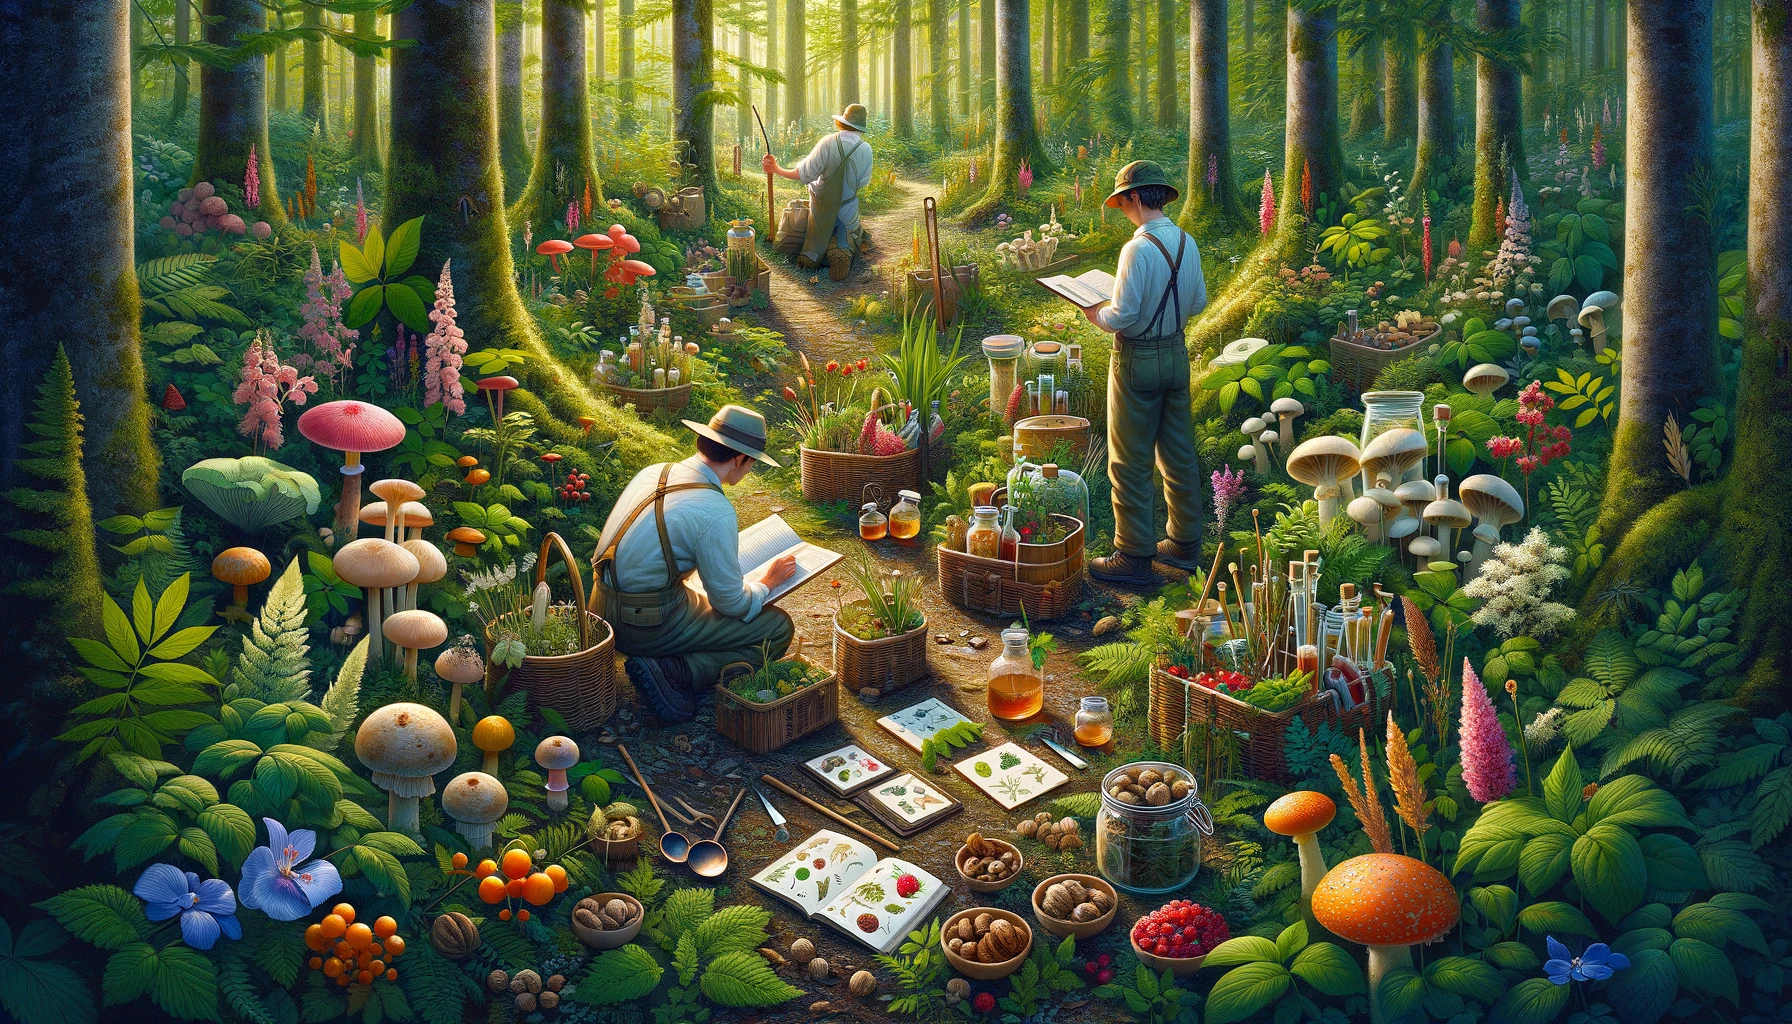 A vibrant and detailed depiction of foragers identifying and harvesting a variety of edible plants and fungi in a lush forest, using knowledge and technology for safety. The image emphasizes the rich biodiversity and the sustainable practice of foraging, showcasing wild berries, mushrooms, and other natural food sources.